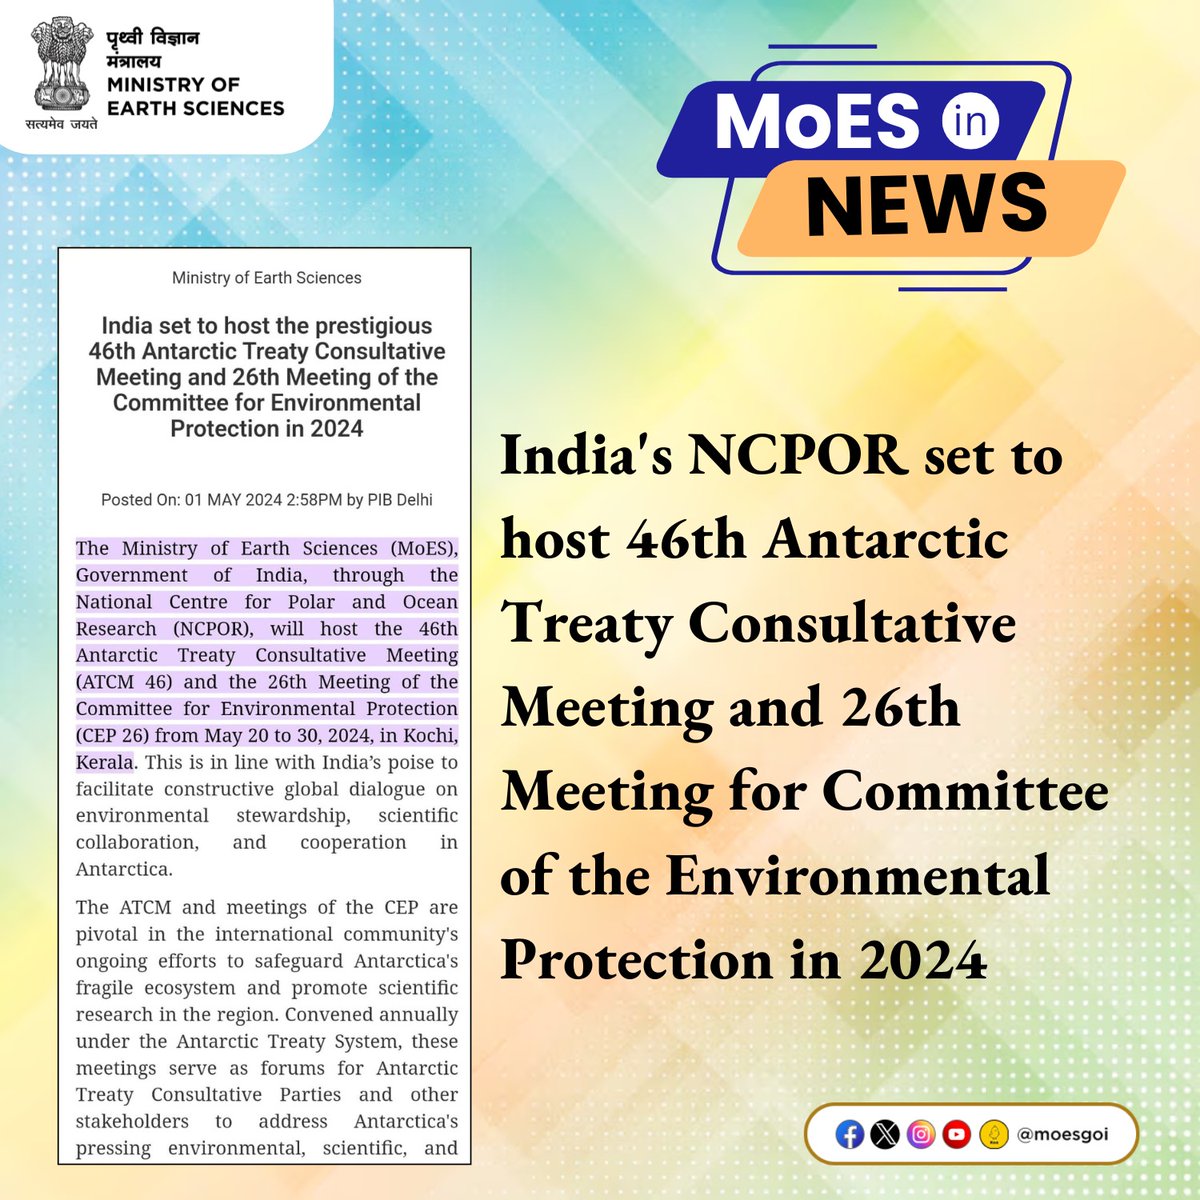 #MoESInNews!
 🌍 India's NCPOR gears up to host the 46th Antarctic Treaty Consultative Meeting and 26th Meeting for Committee of the Environmental Protection in 2024. A milestone moment for global collaboration and environmental stewardship!